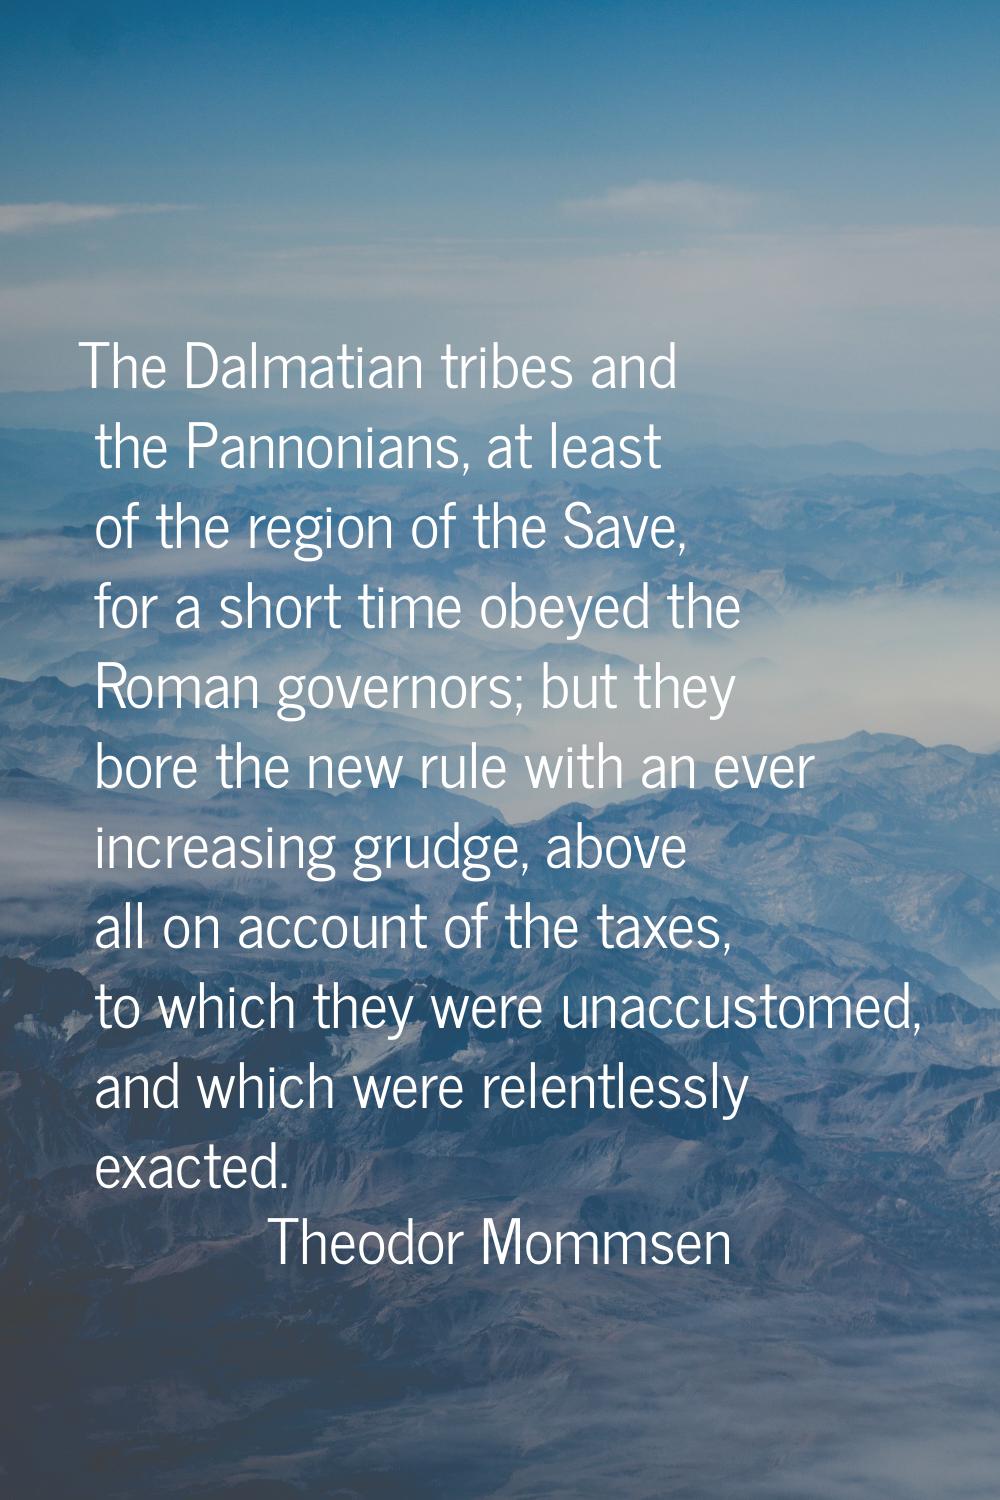 The Dalmatian tribes and the Pannonians, at least of the region of the Save, for a short time obeye